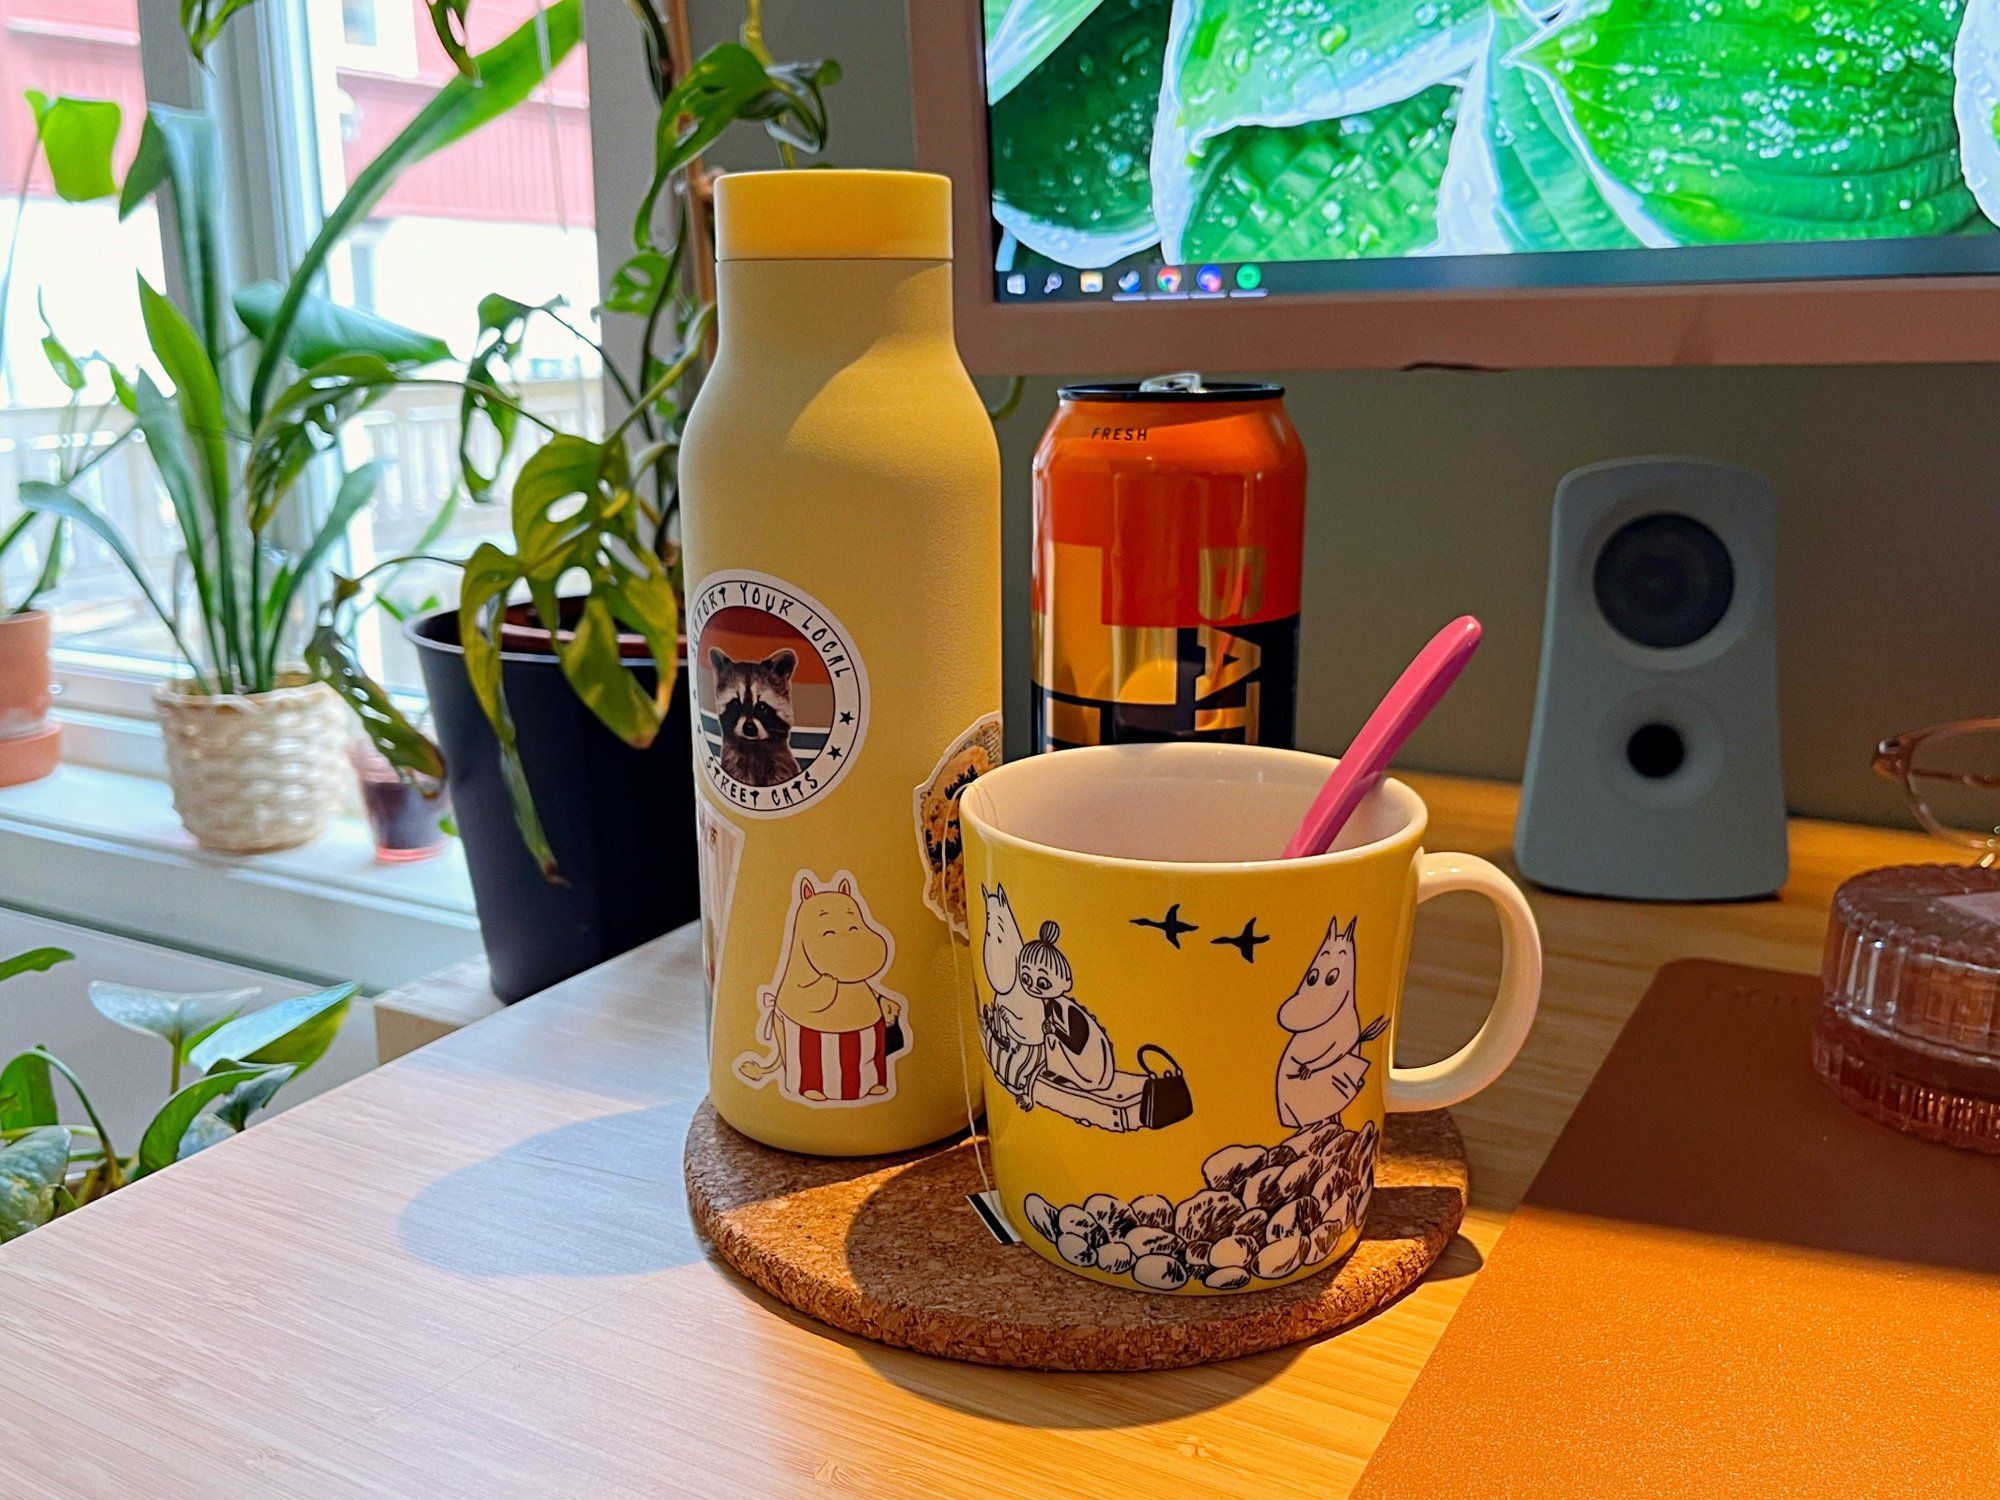 A yellow Moomin water bottle, a can of Battery energy drink, and a yellow Moomin mug on a cork table mat